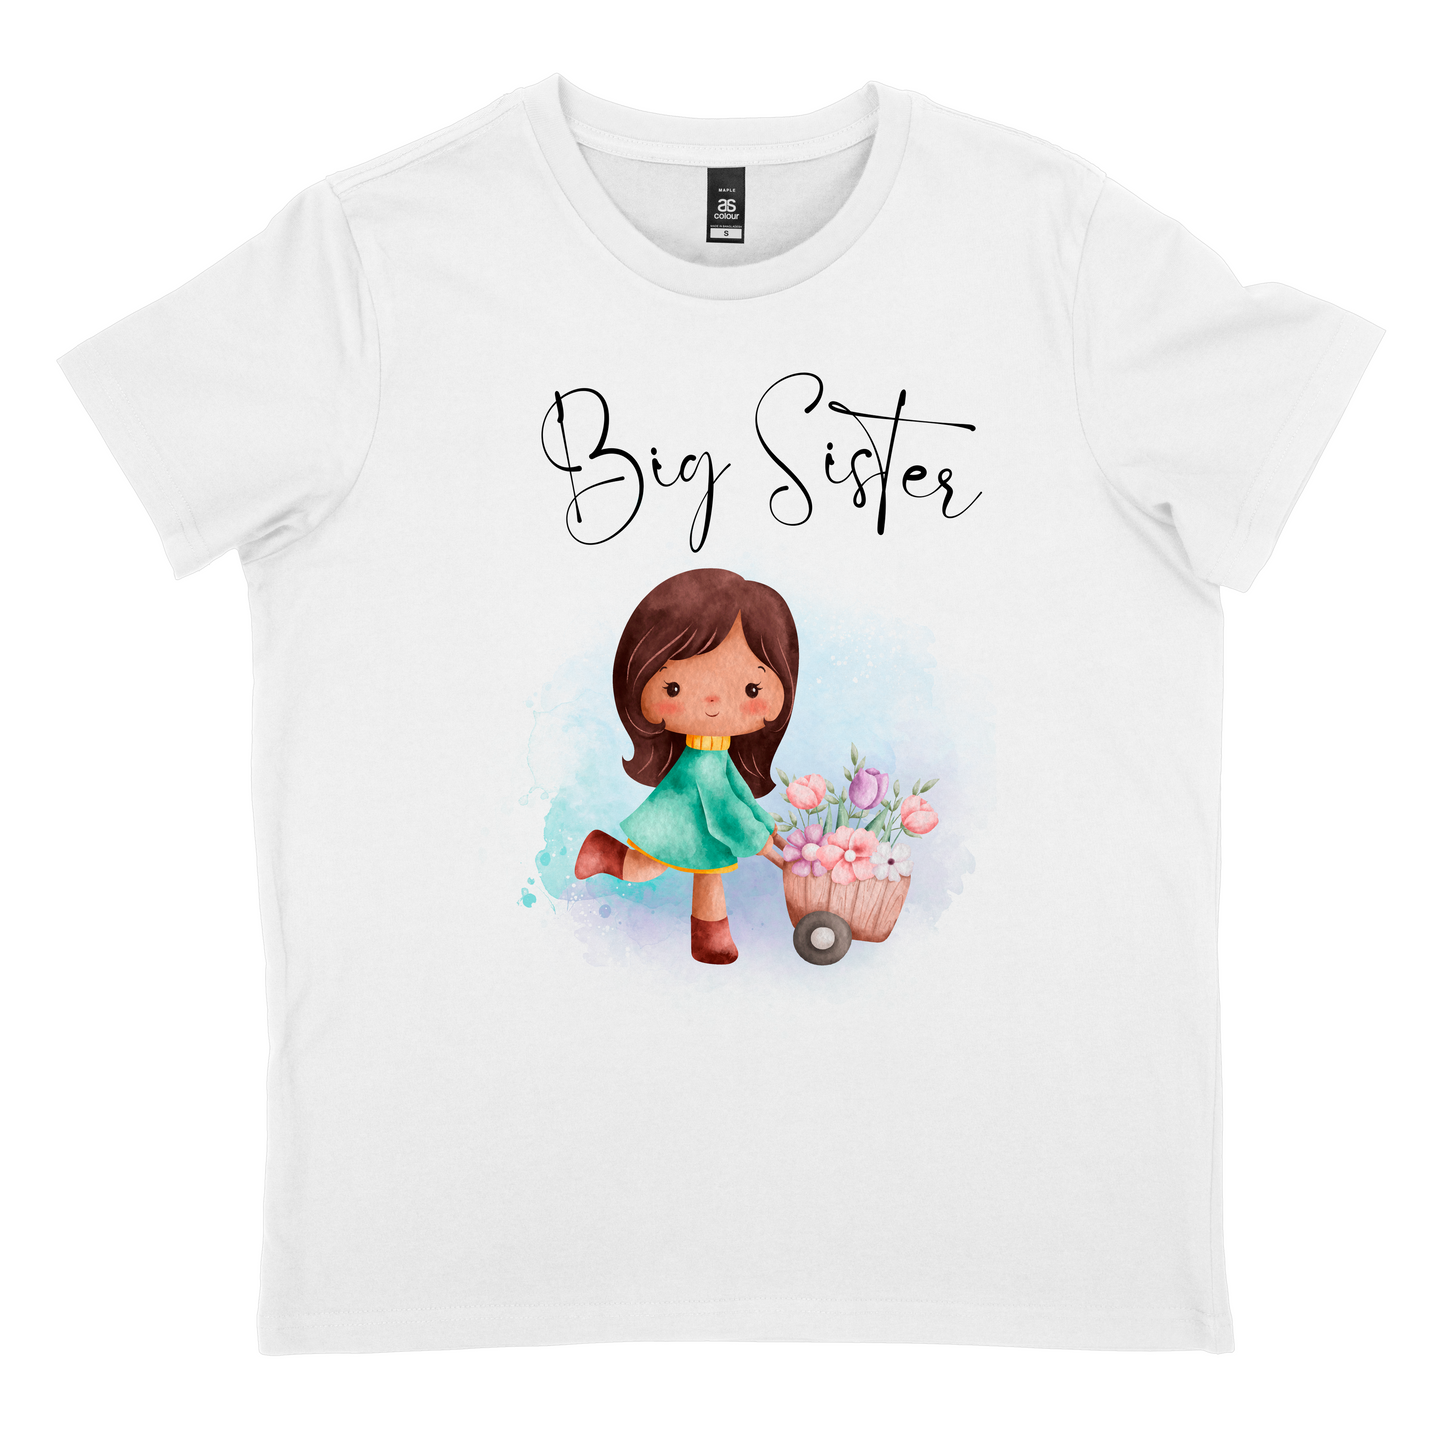 Big Sister T shirt Girl with Flowers